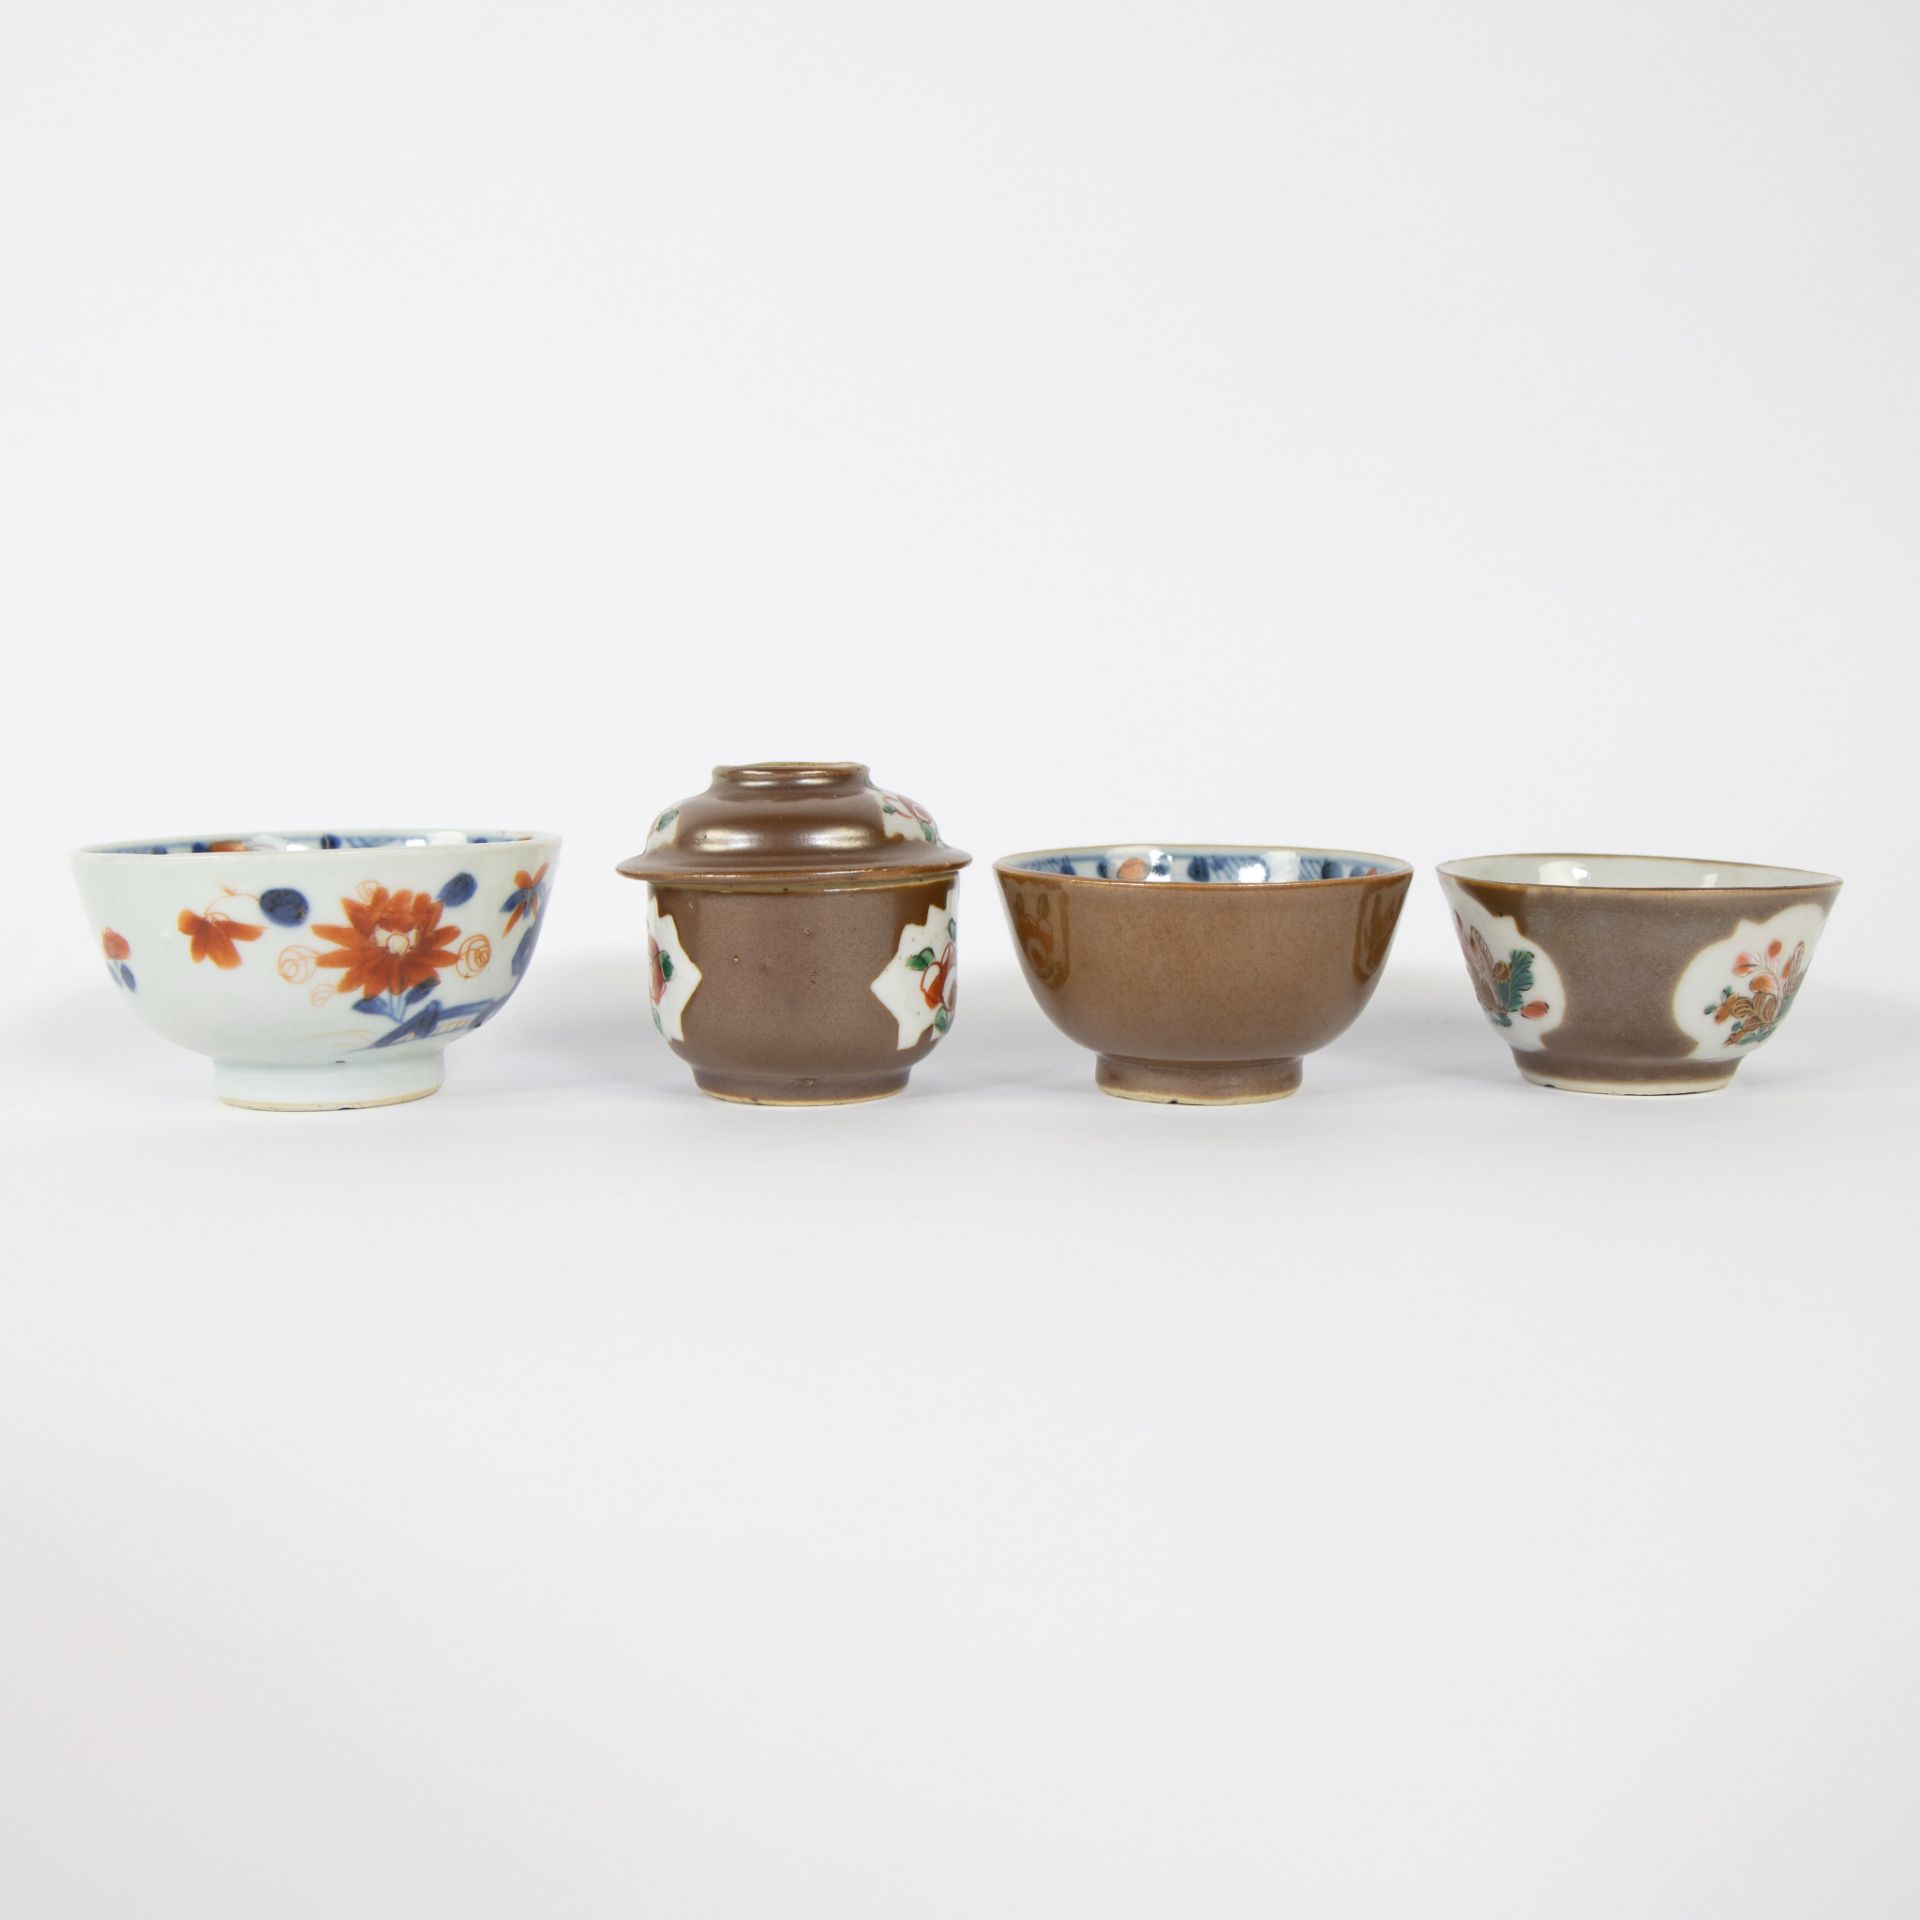 A set of Chinese batavia brown cups and saucers, one Imari cup and 2 plates blue/white, 18th C. - Image 7 of 11